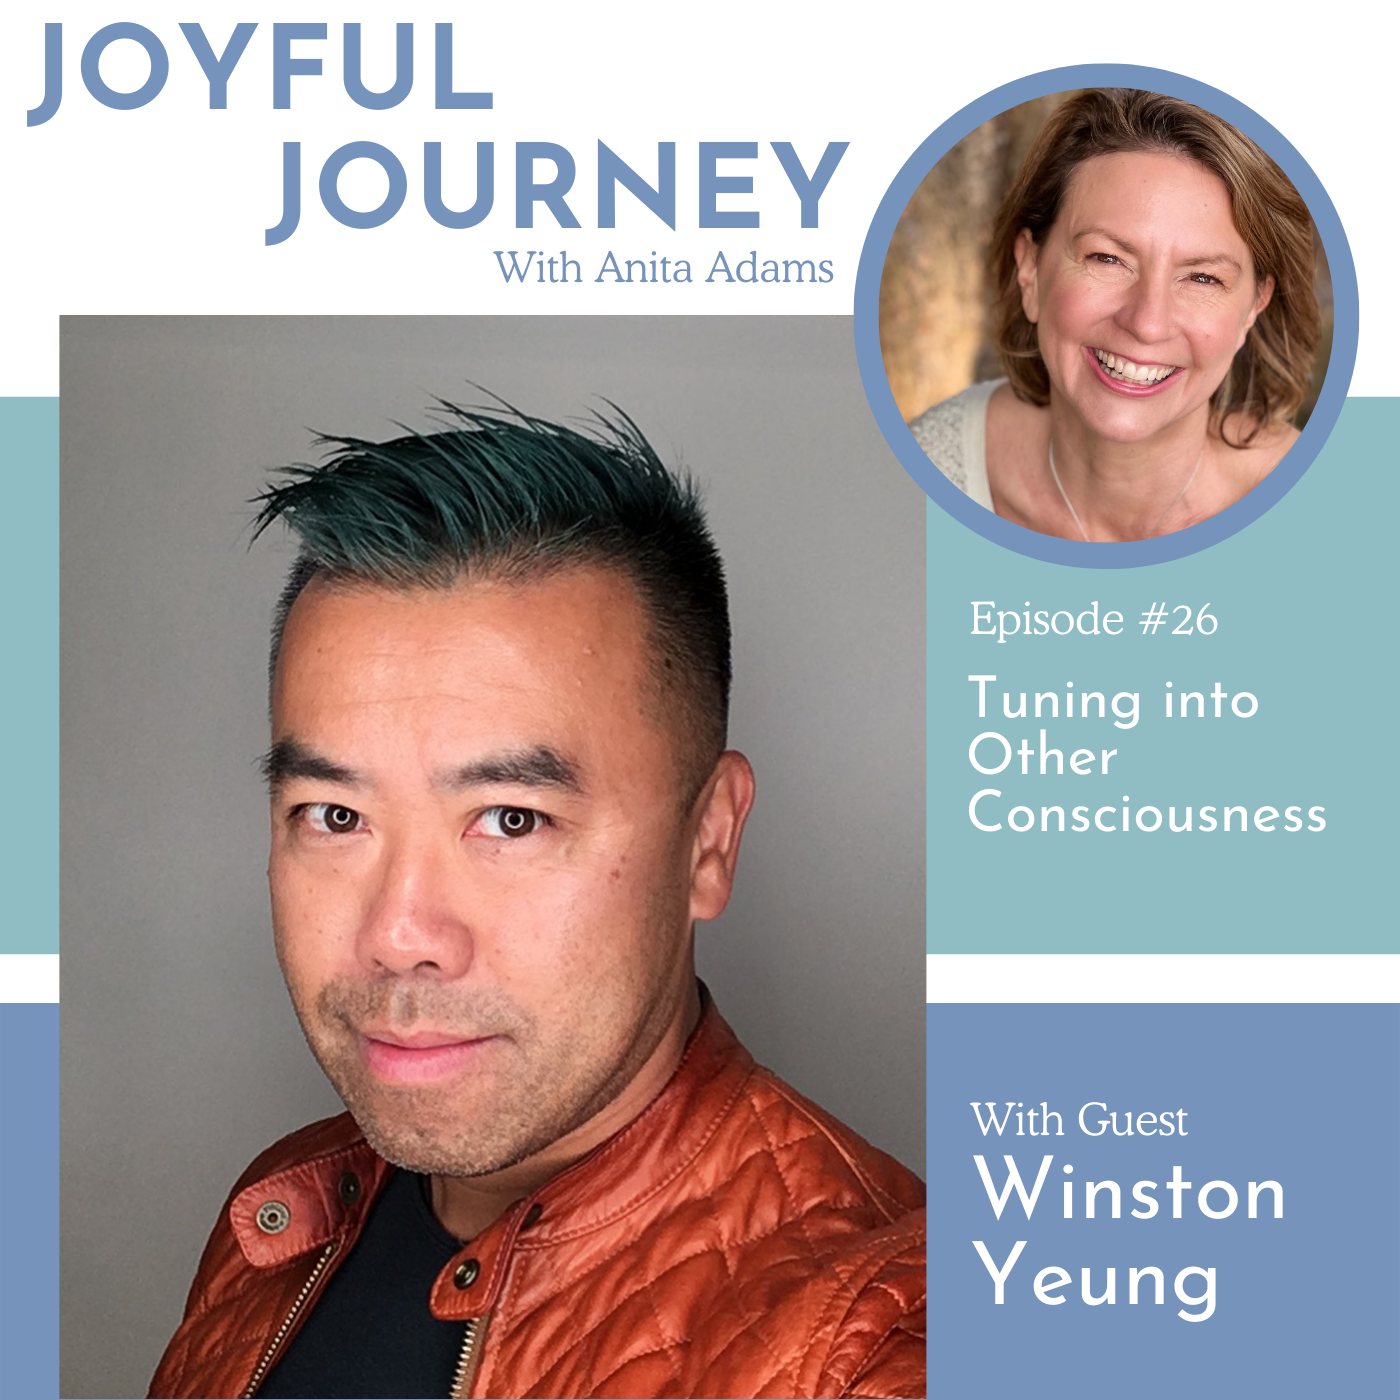 Tuning into Other Consciousness - A Conversation with Winston Yeung